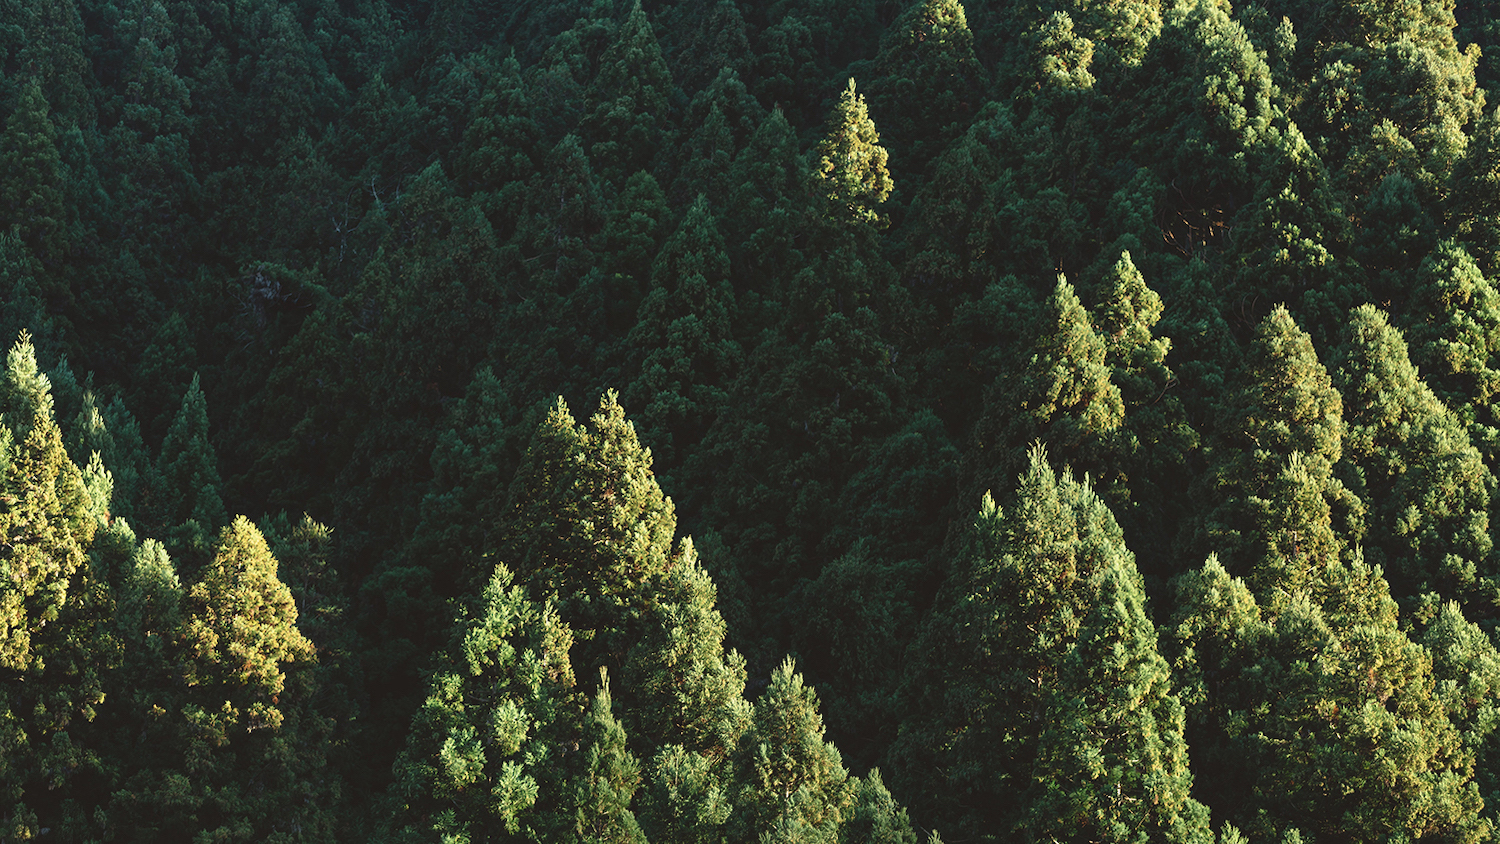 Evergreen Forest - New Fund Established to Promote Diversity in Forestry - College of Natural Resources News - NC State University